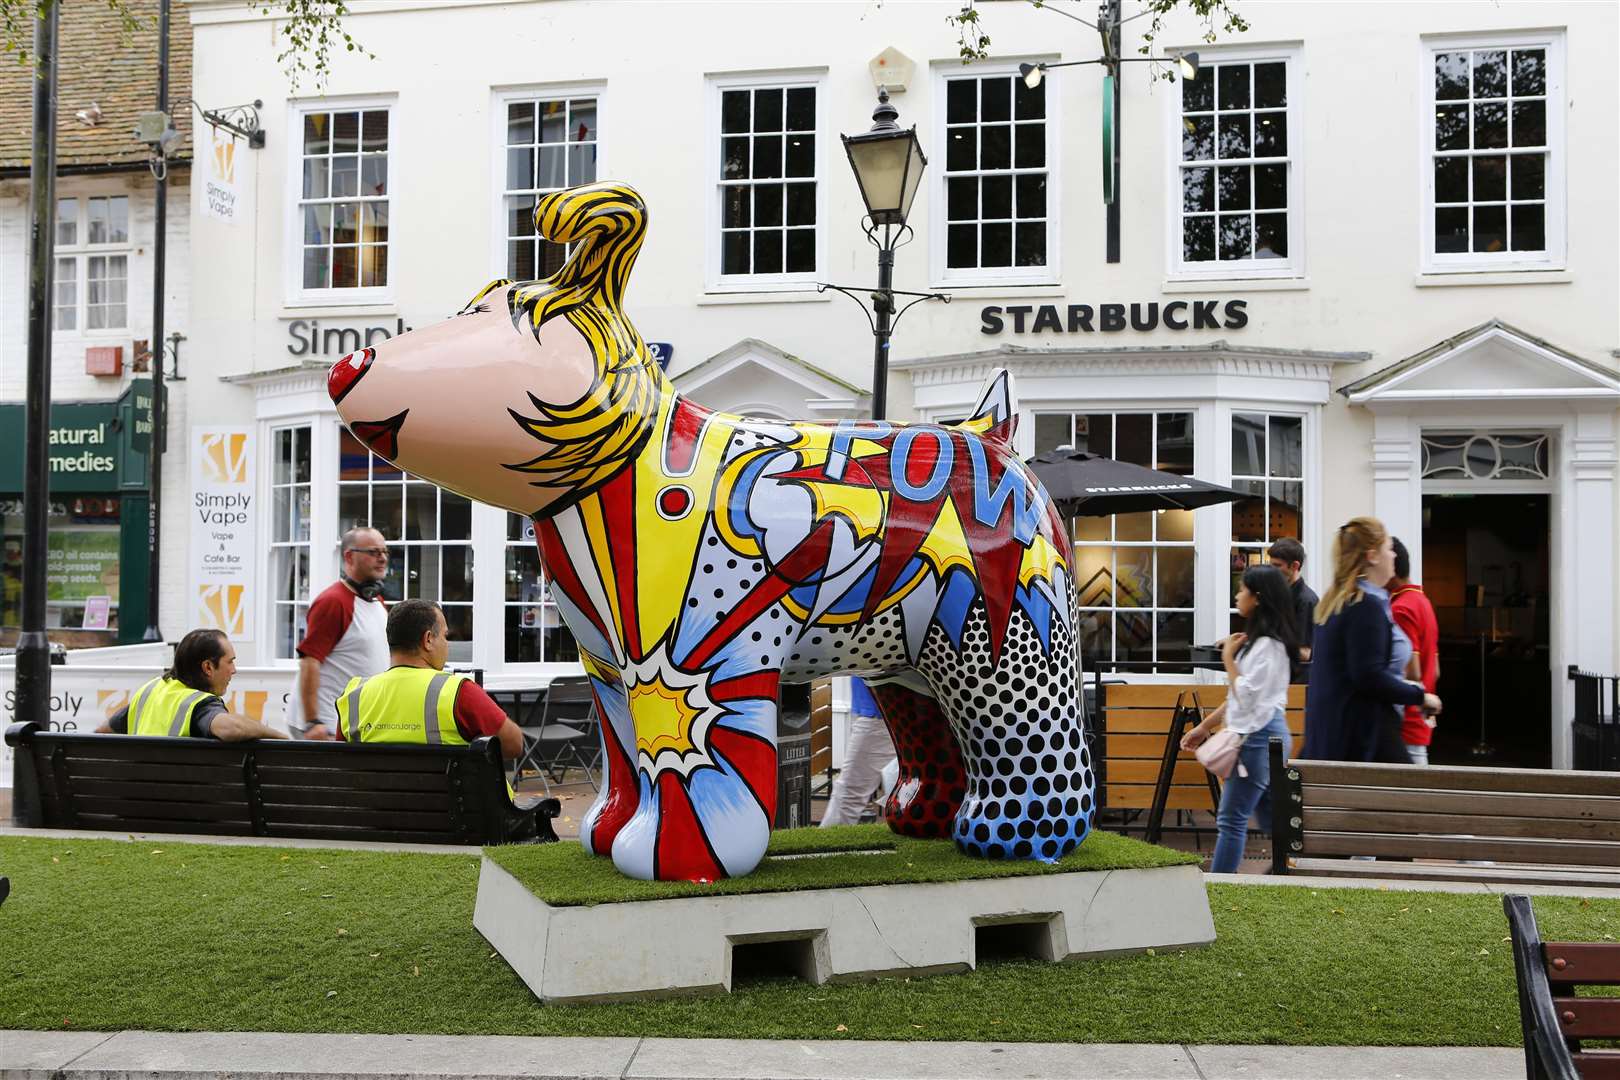 Snowdogs will remain on display until November